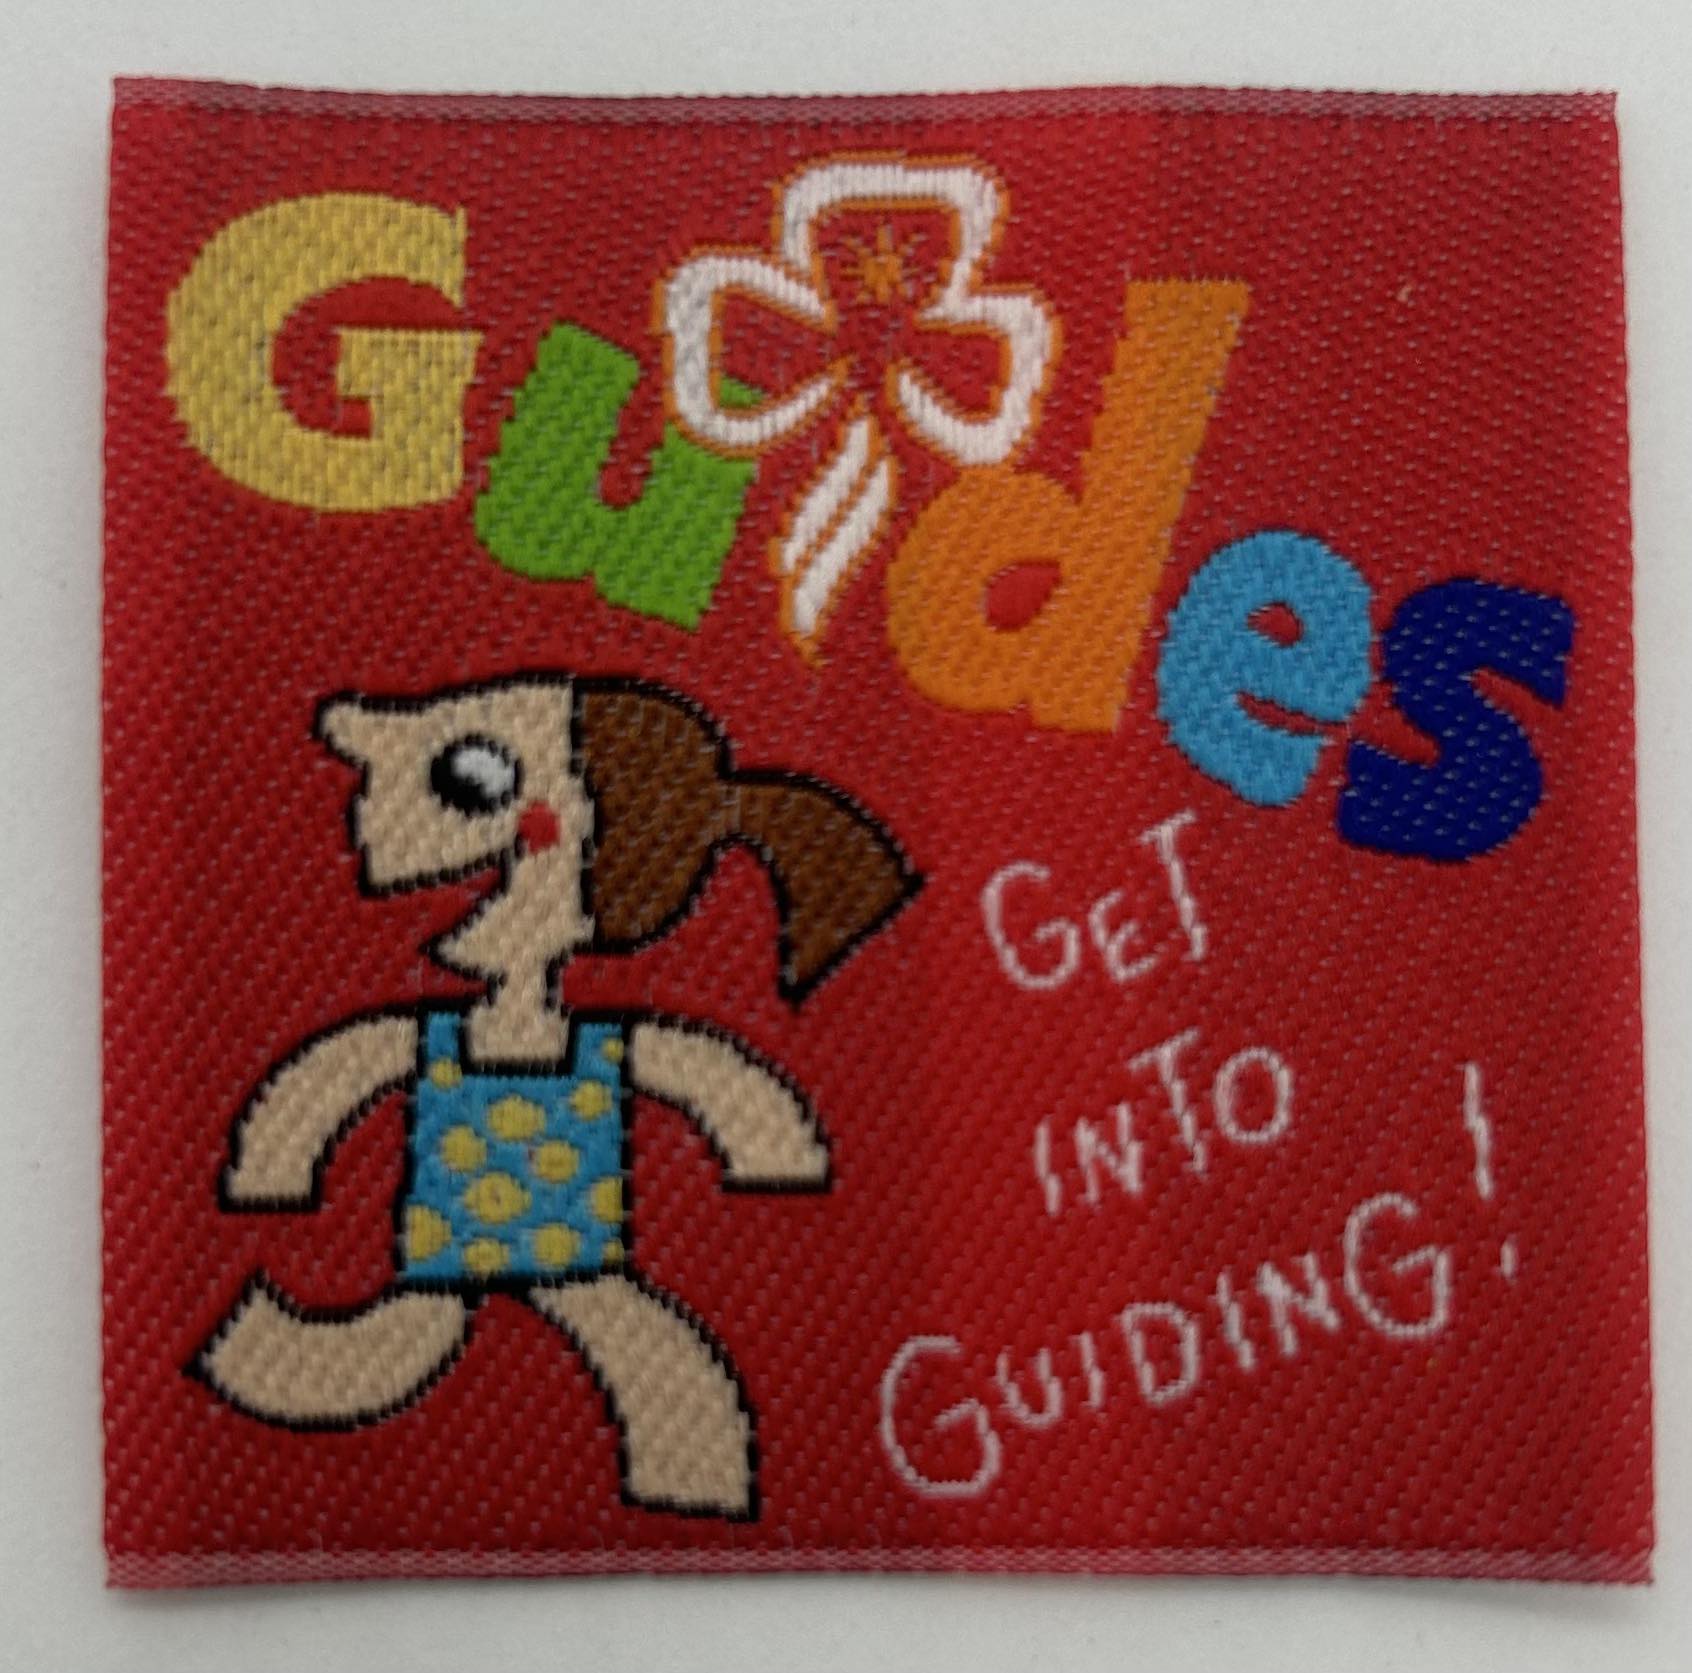 a red square unbound fun badge with a girl and the words guides get into guiding